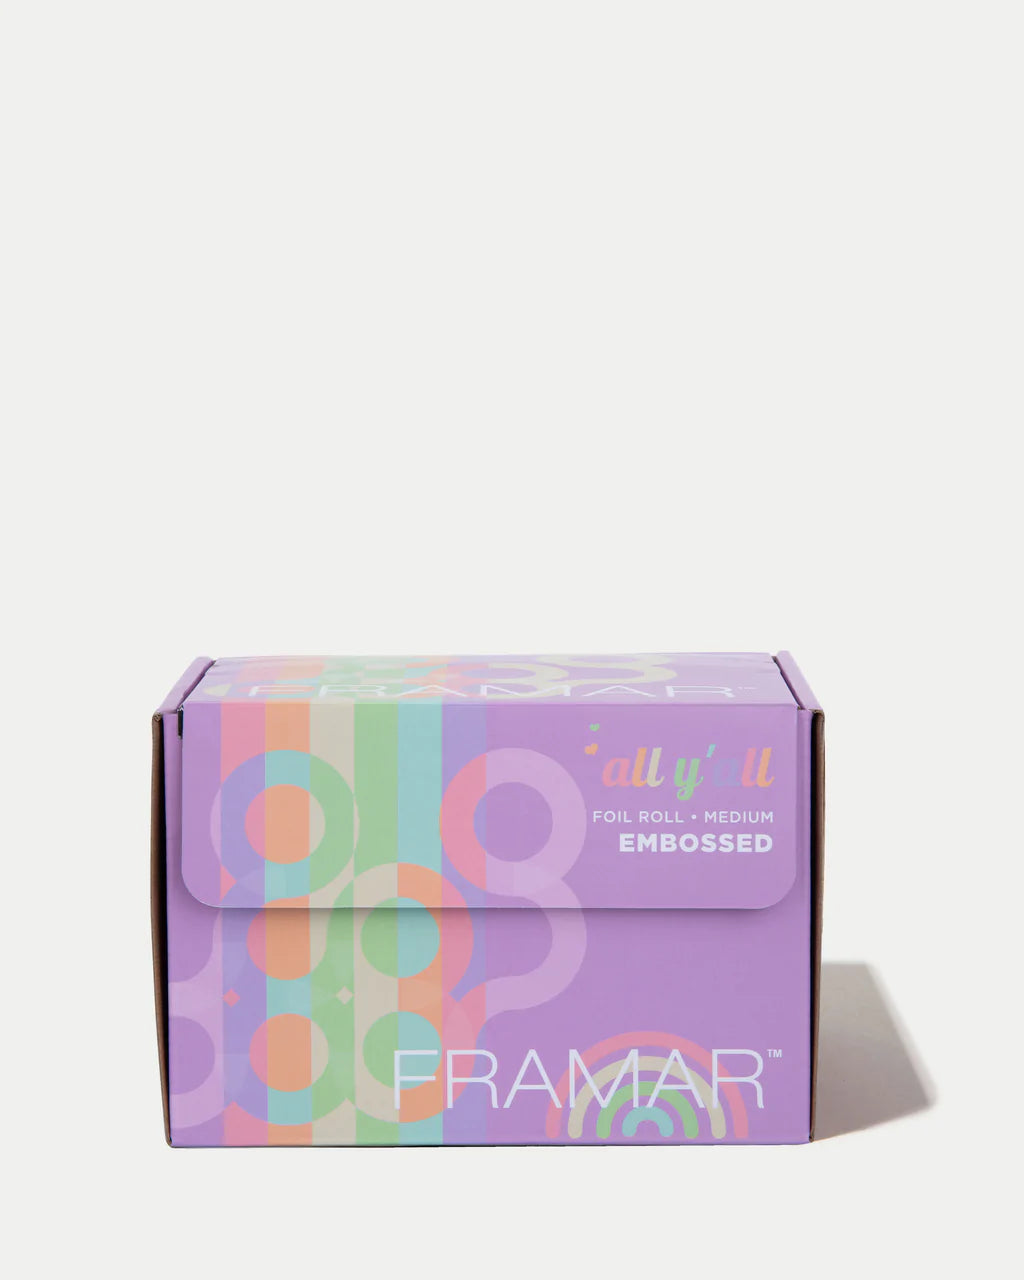 Framar Embossed Roll All Y'all Pastel 320ft